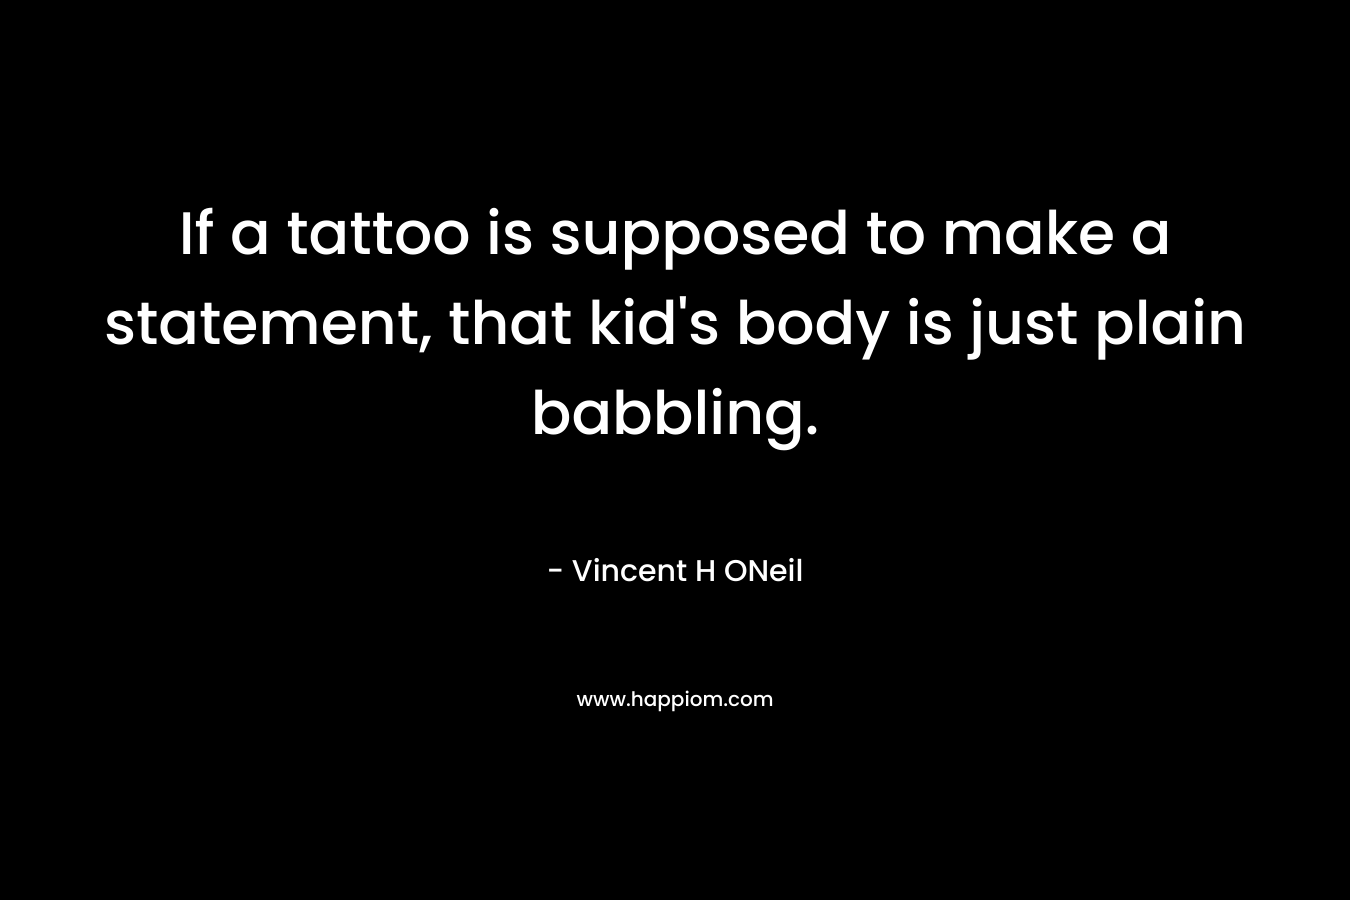 If a tattoo is supposed to make a statement, that kid’s body is just plain babbling. – Vincent H ONeil